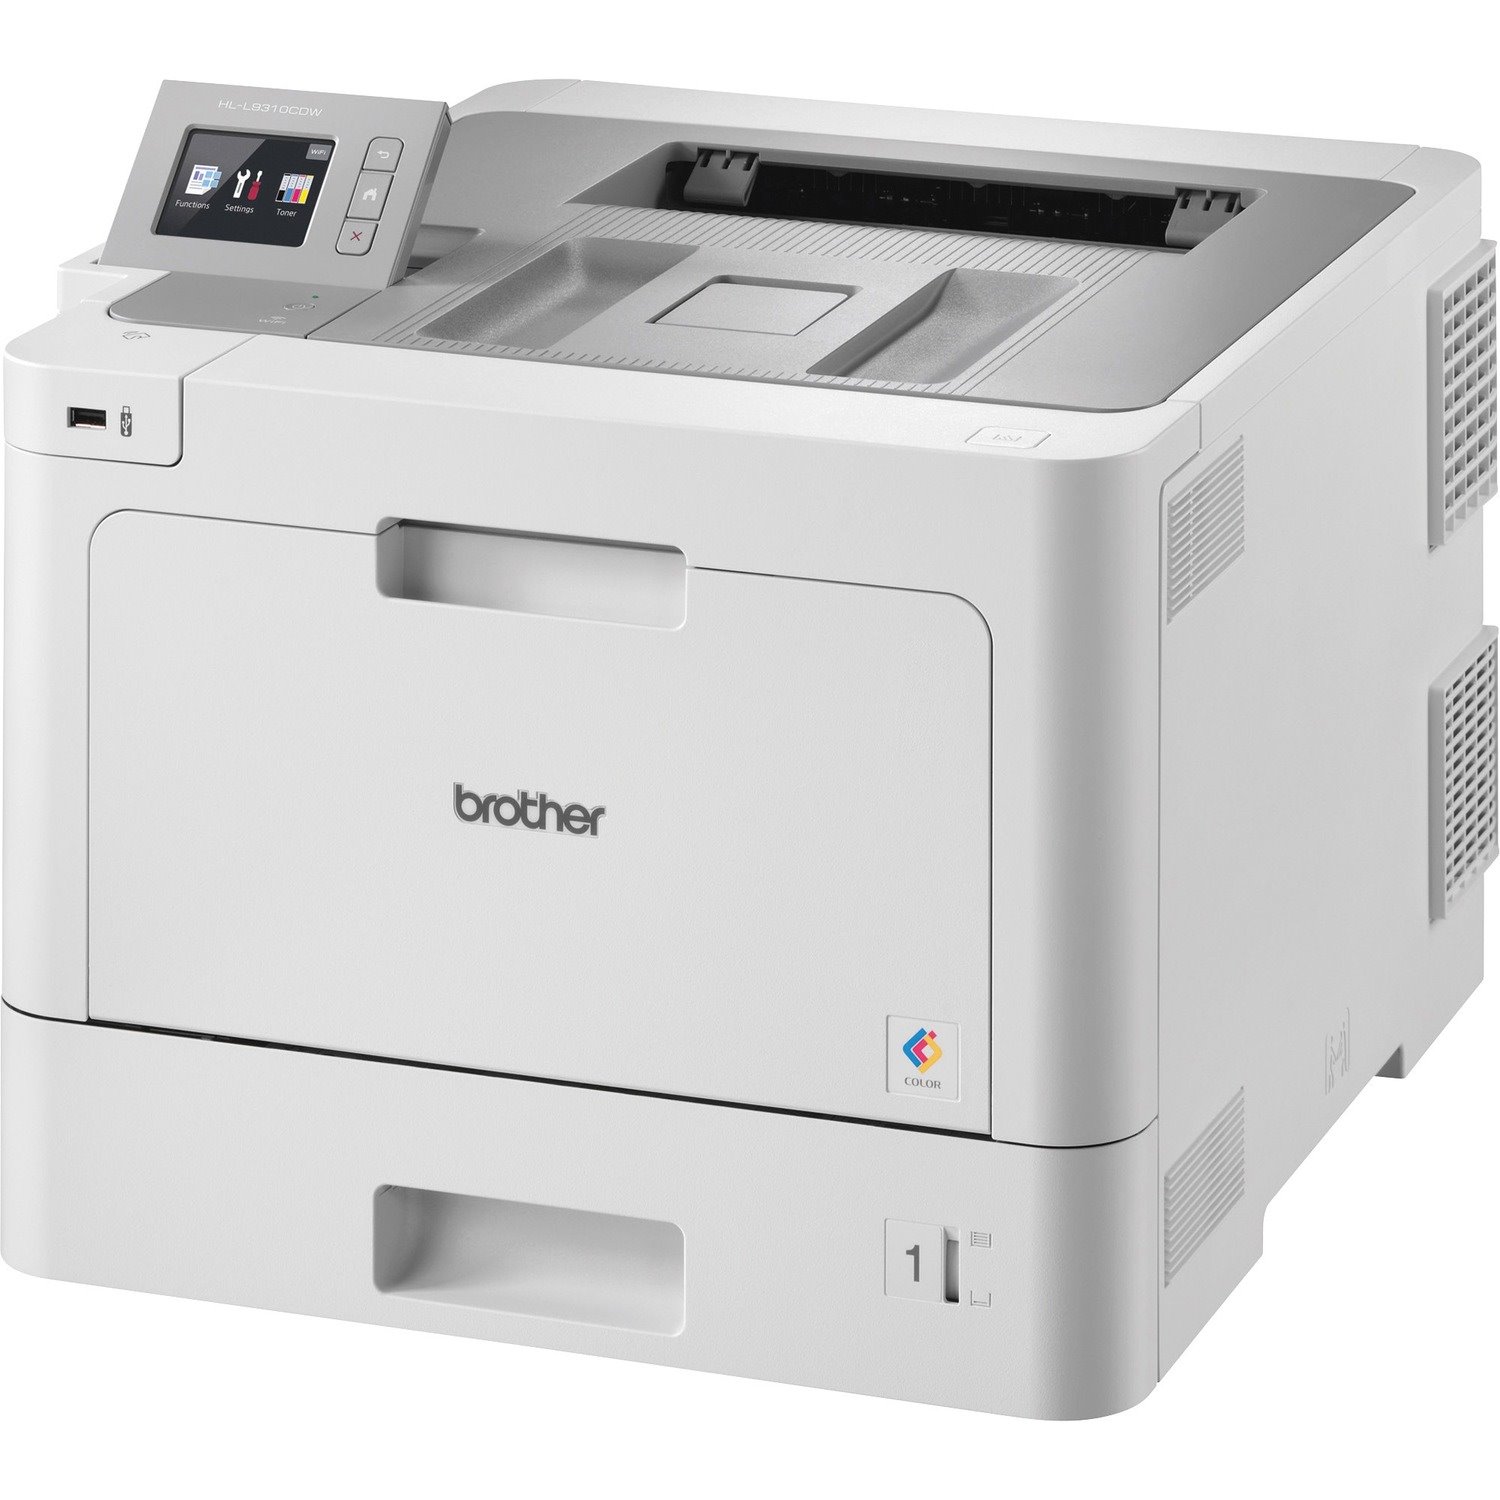 Brother Business Color Laser Printer HL-L9310CDW - for Mid-Size Workgroups with Higher Print Volumes